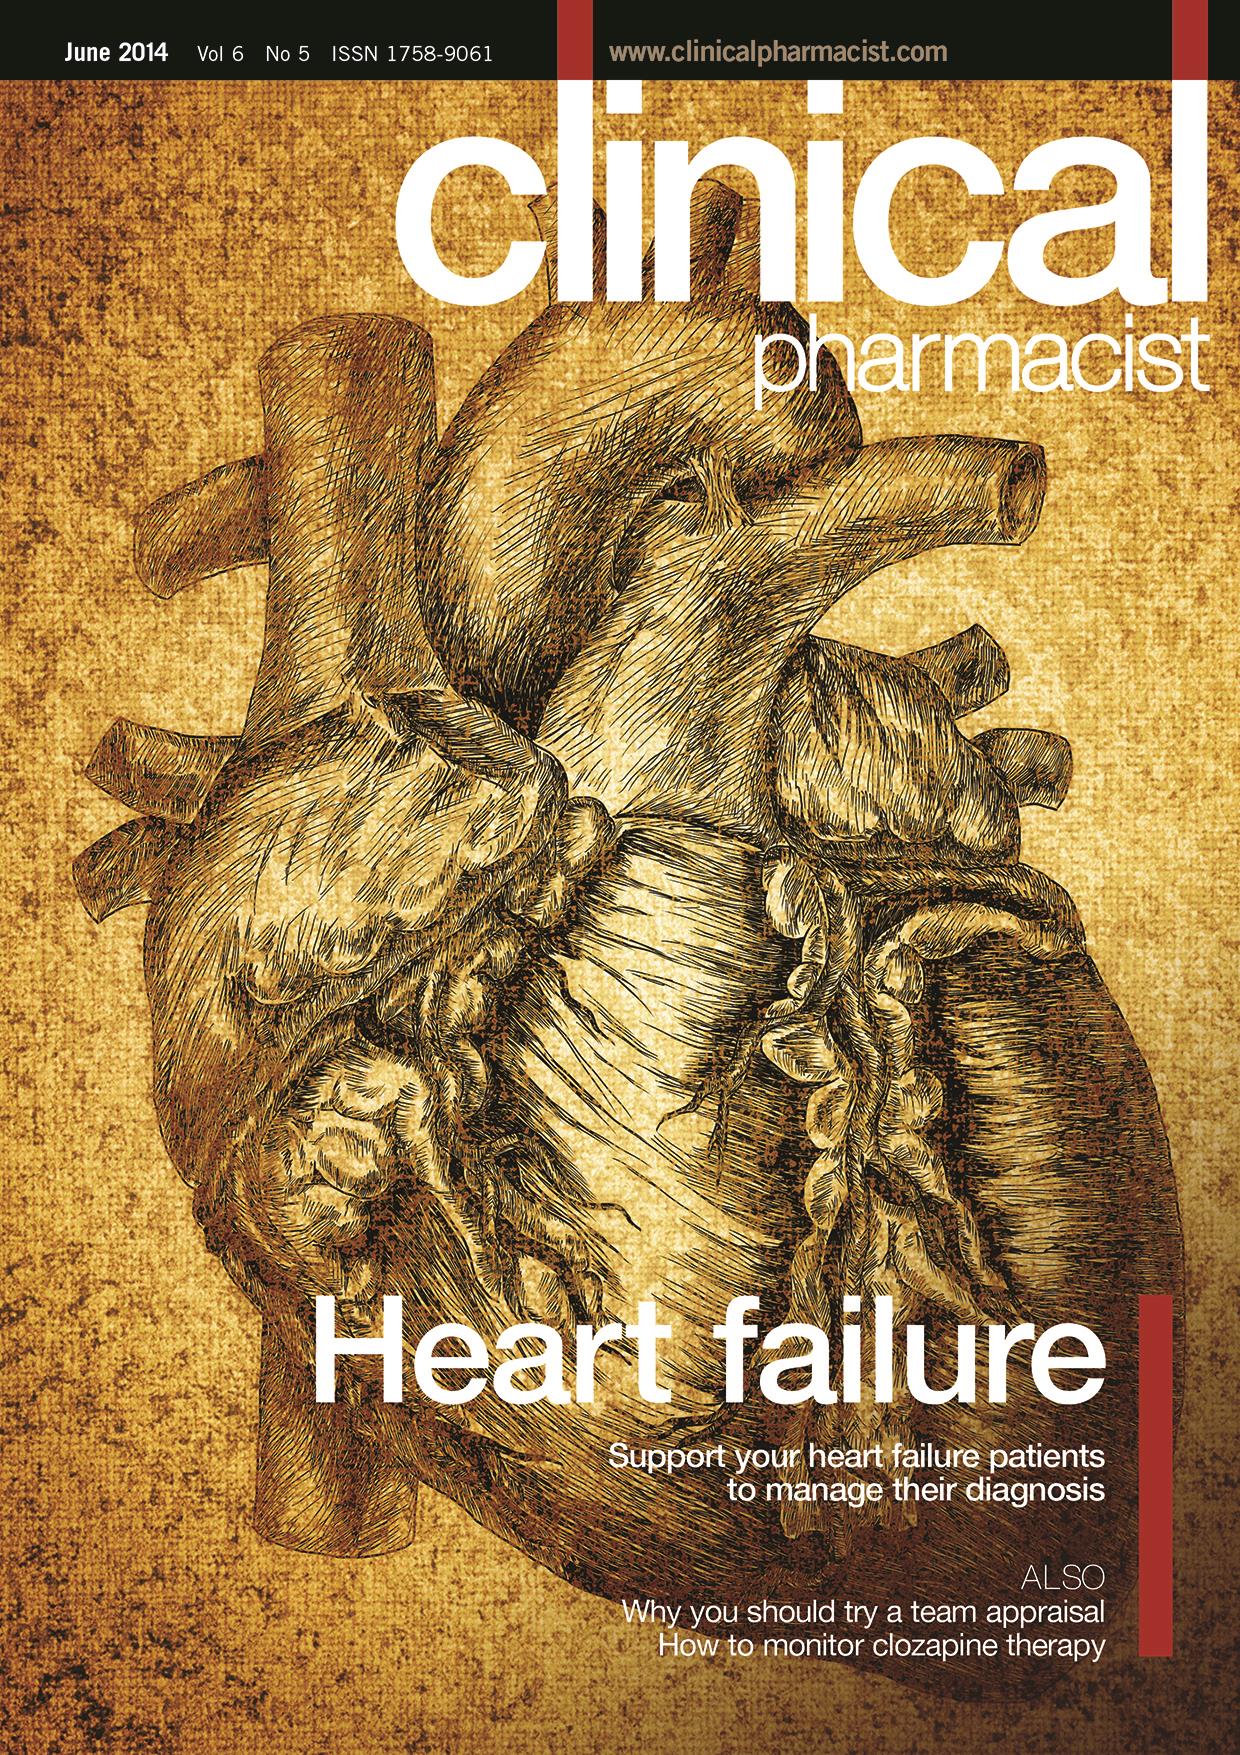 Publication issue cover for CP, June 2014, Vol 6, No 5